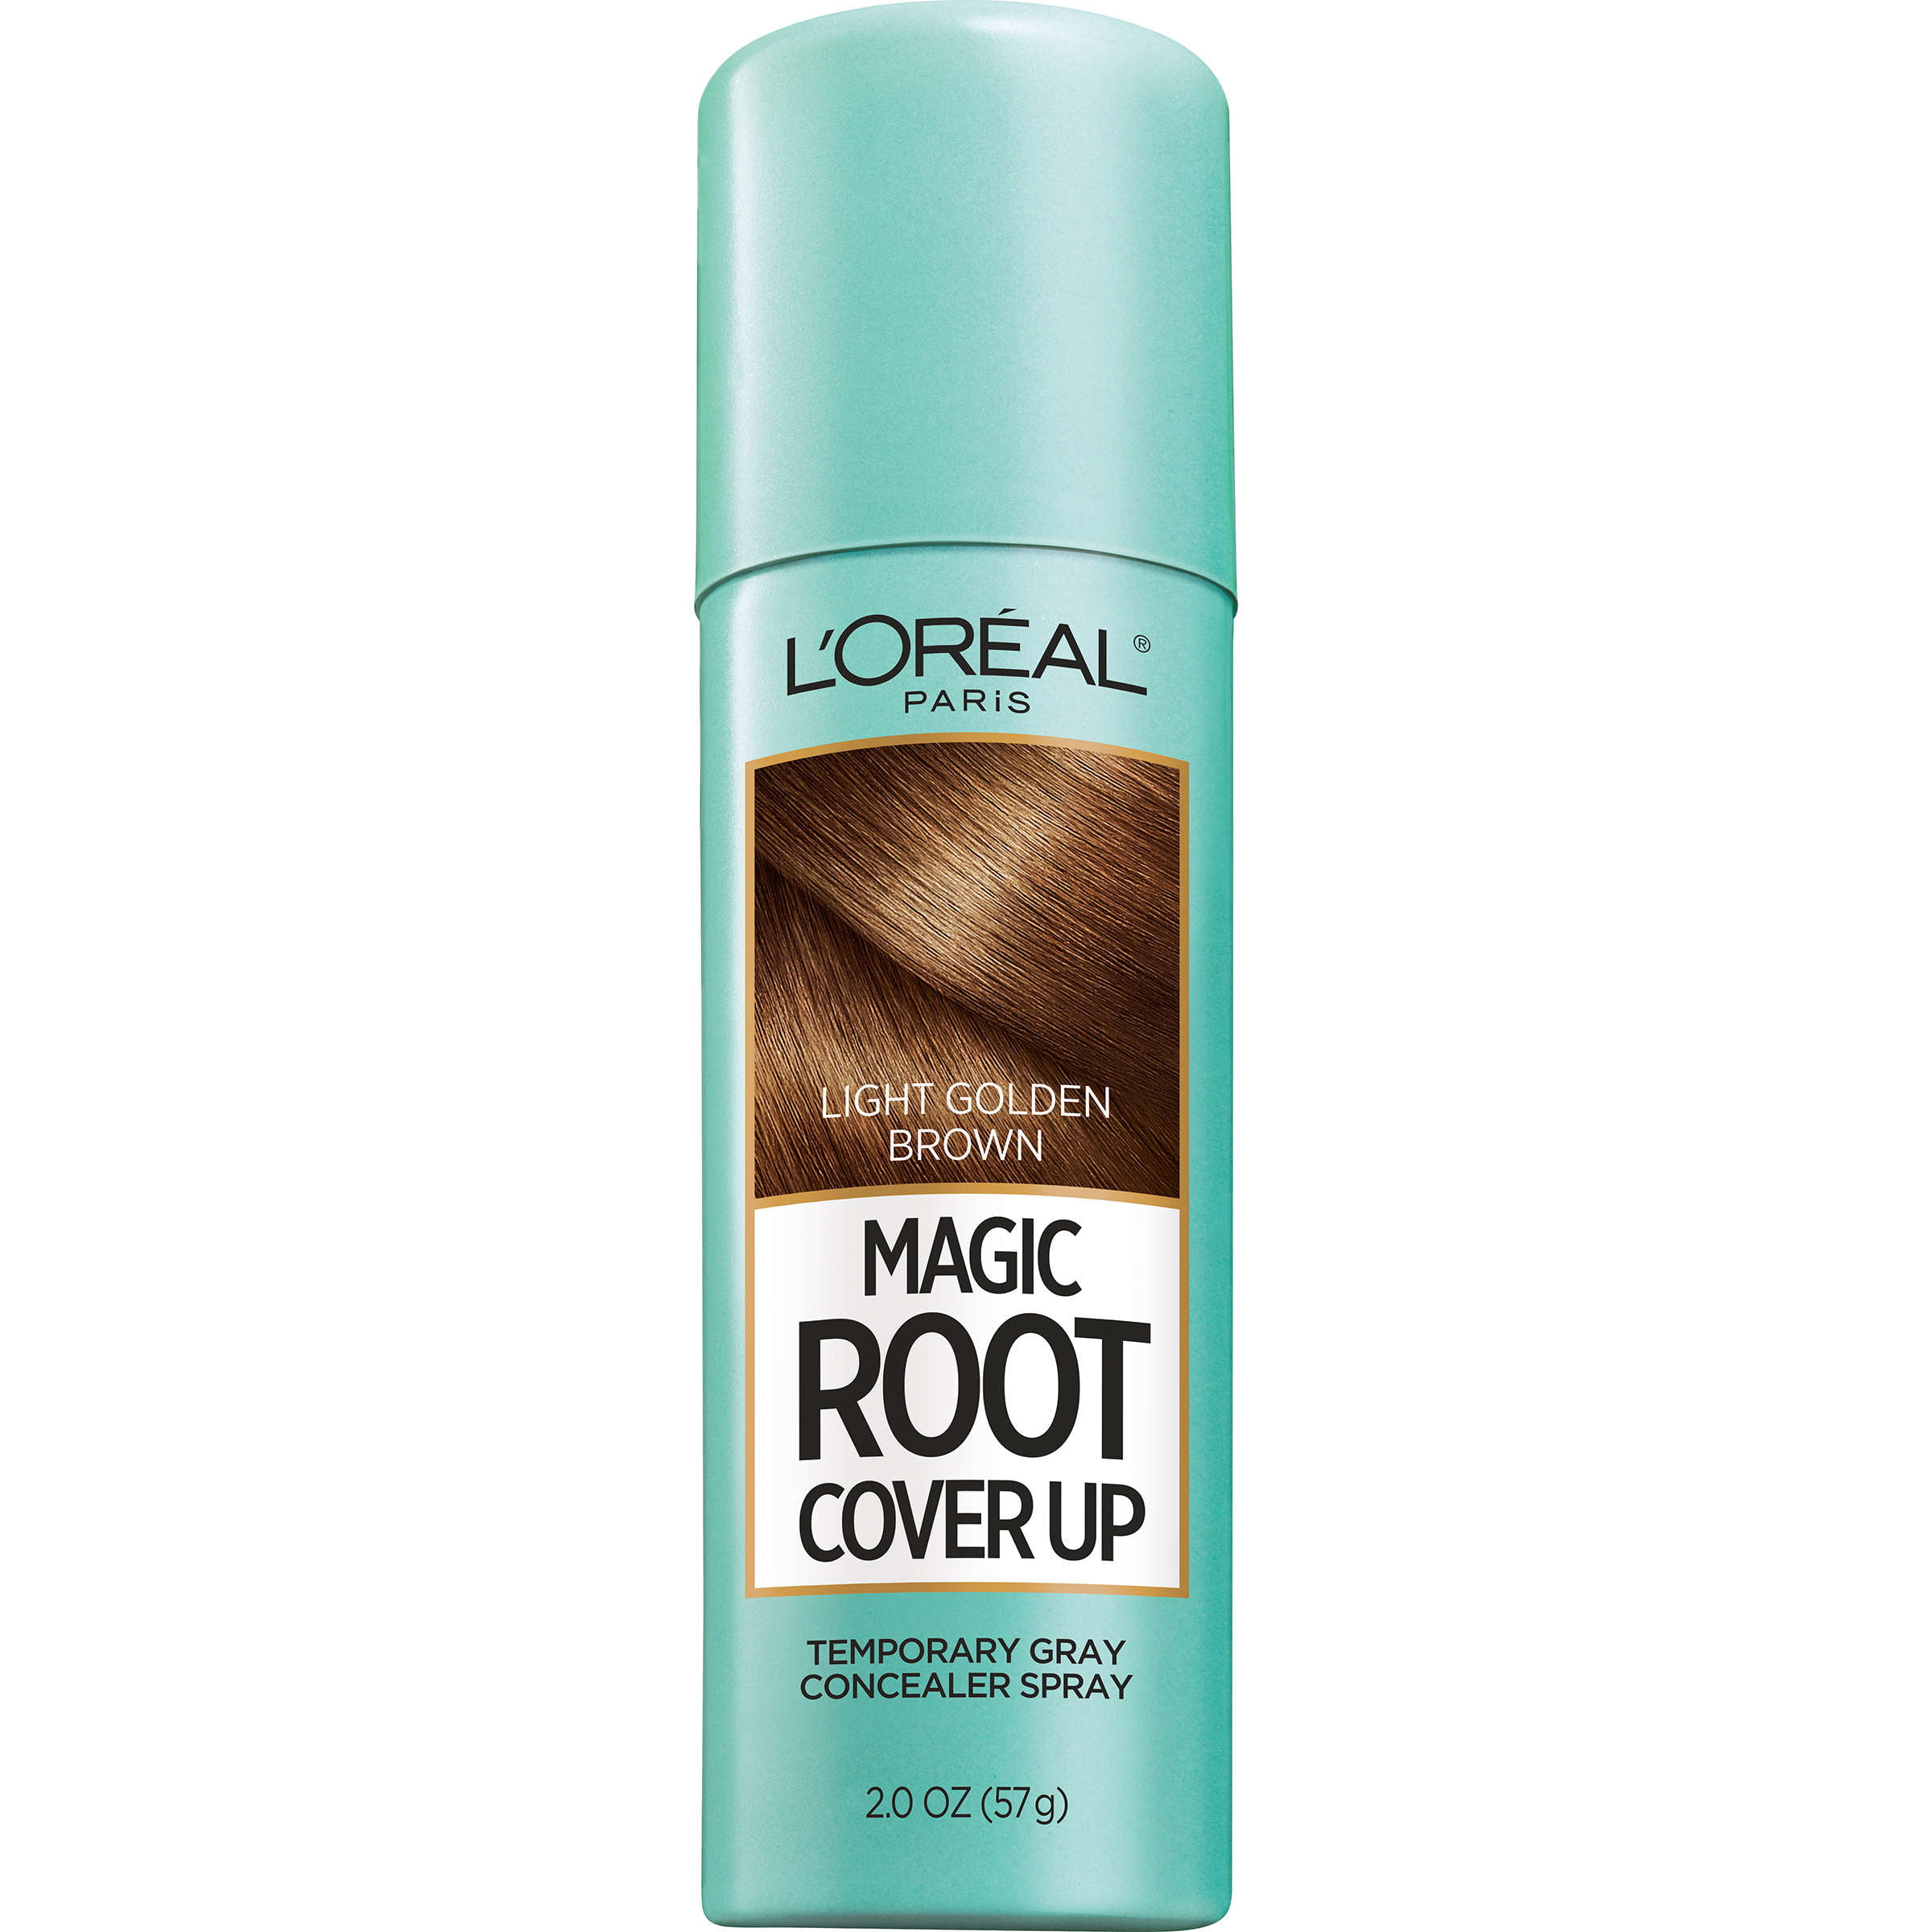 L'oreal Paris Magic Root Cover Up Hair Color Spray, Light Golden Brown